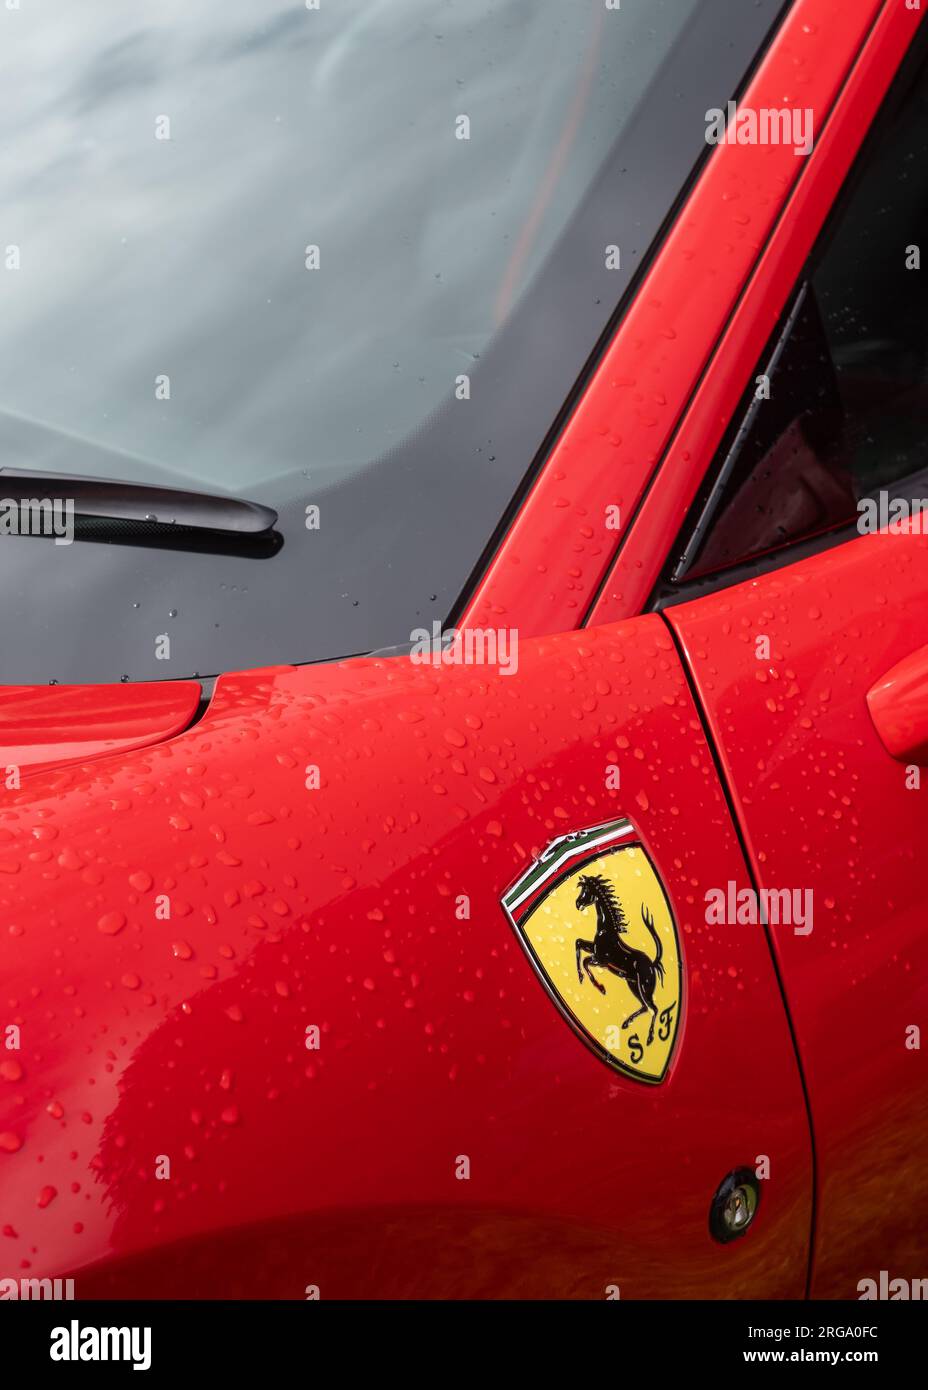 The Prancing Horse side panel logo and windscreen section of a red Ferrari F8 Tributo Italian sports car in portrait view. Stock Photo